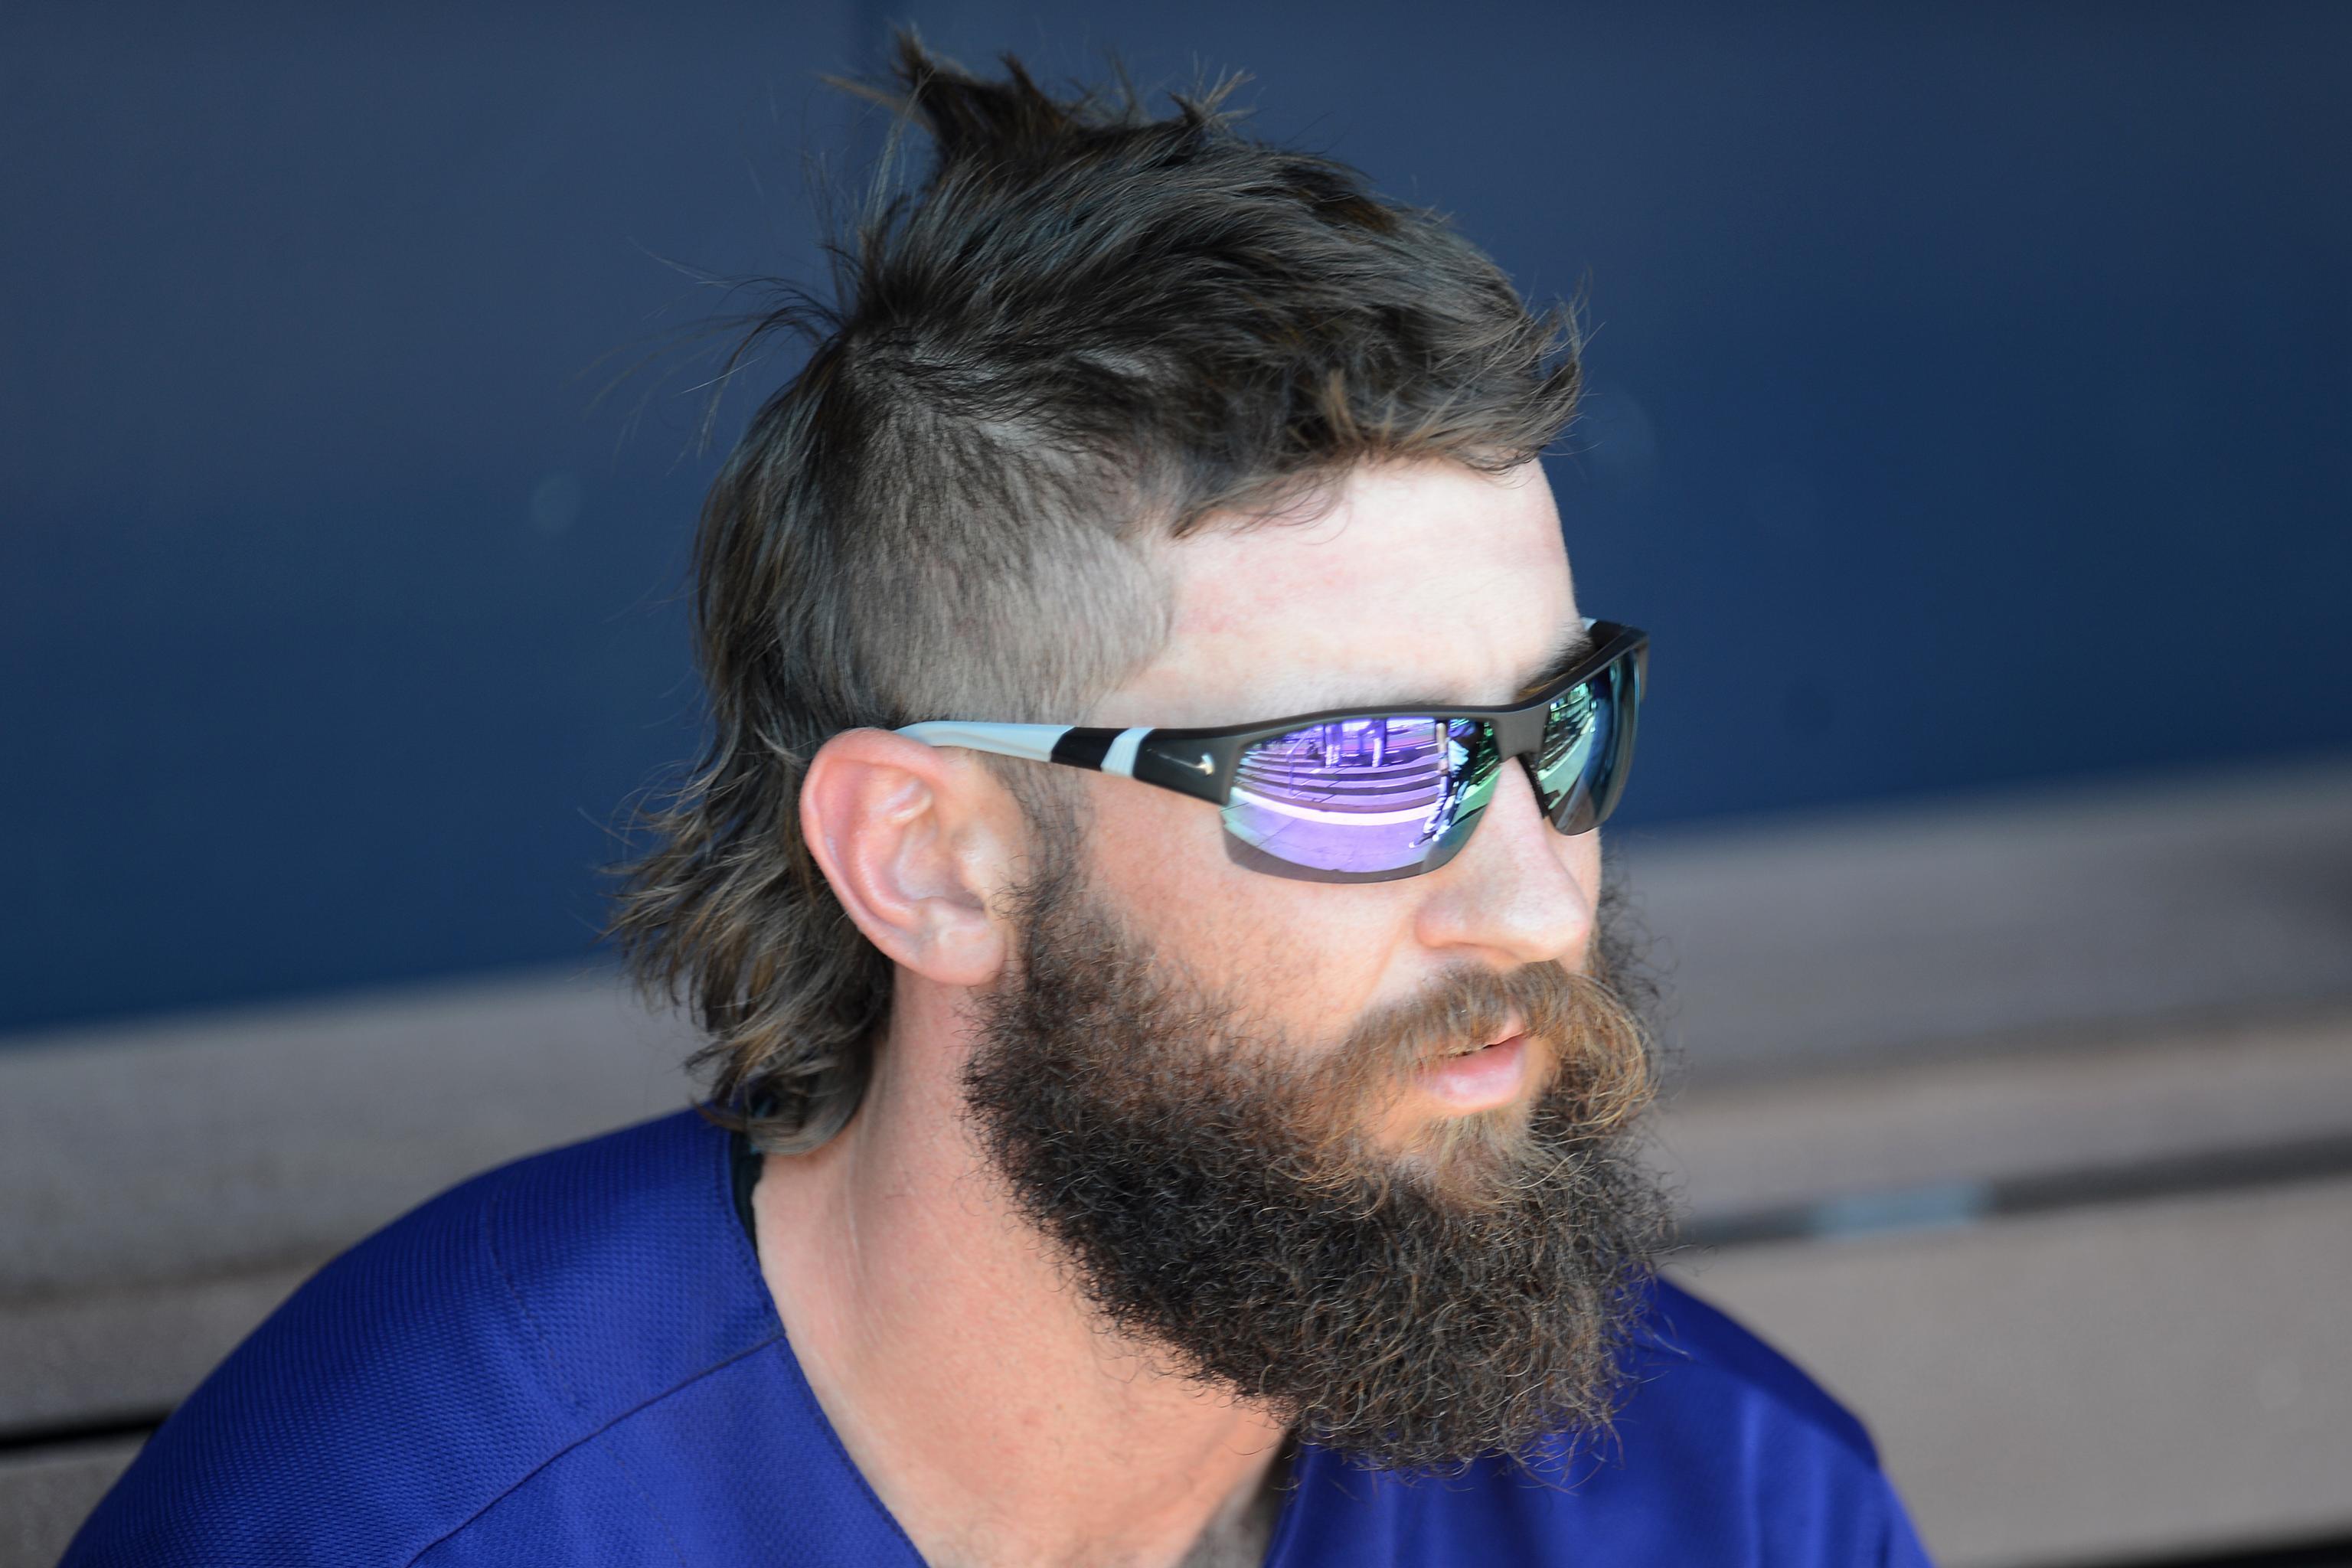 Charlie Blackmon to have surgery for knee injury, season over